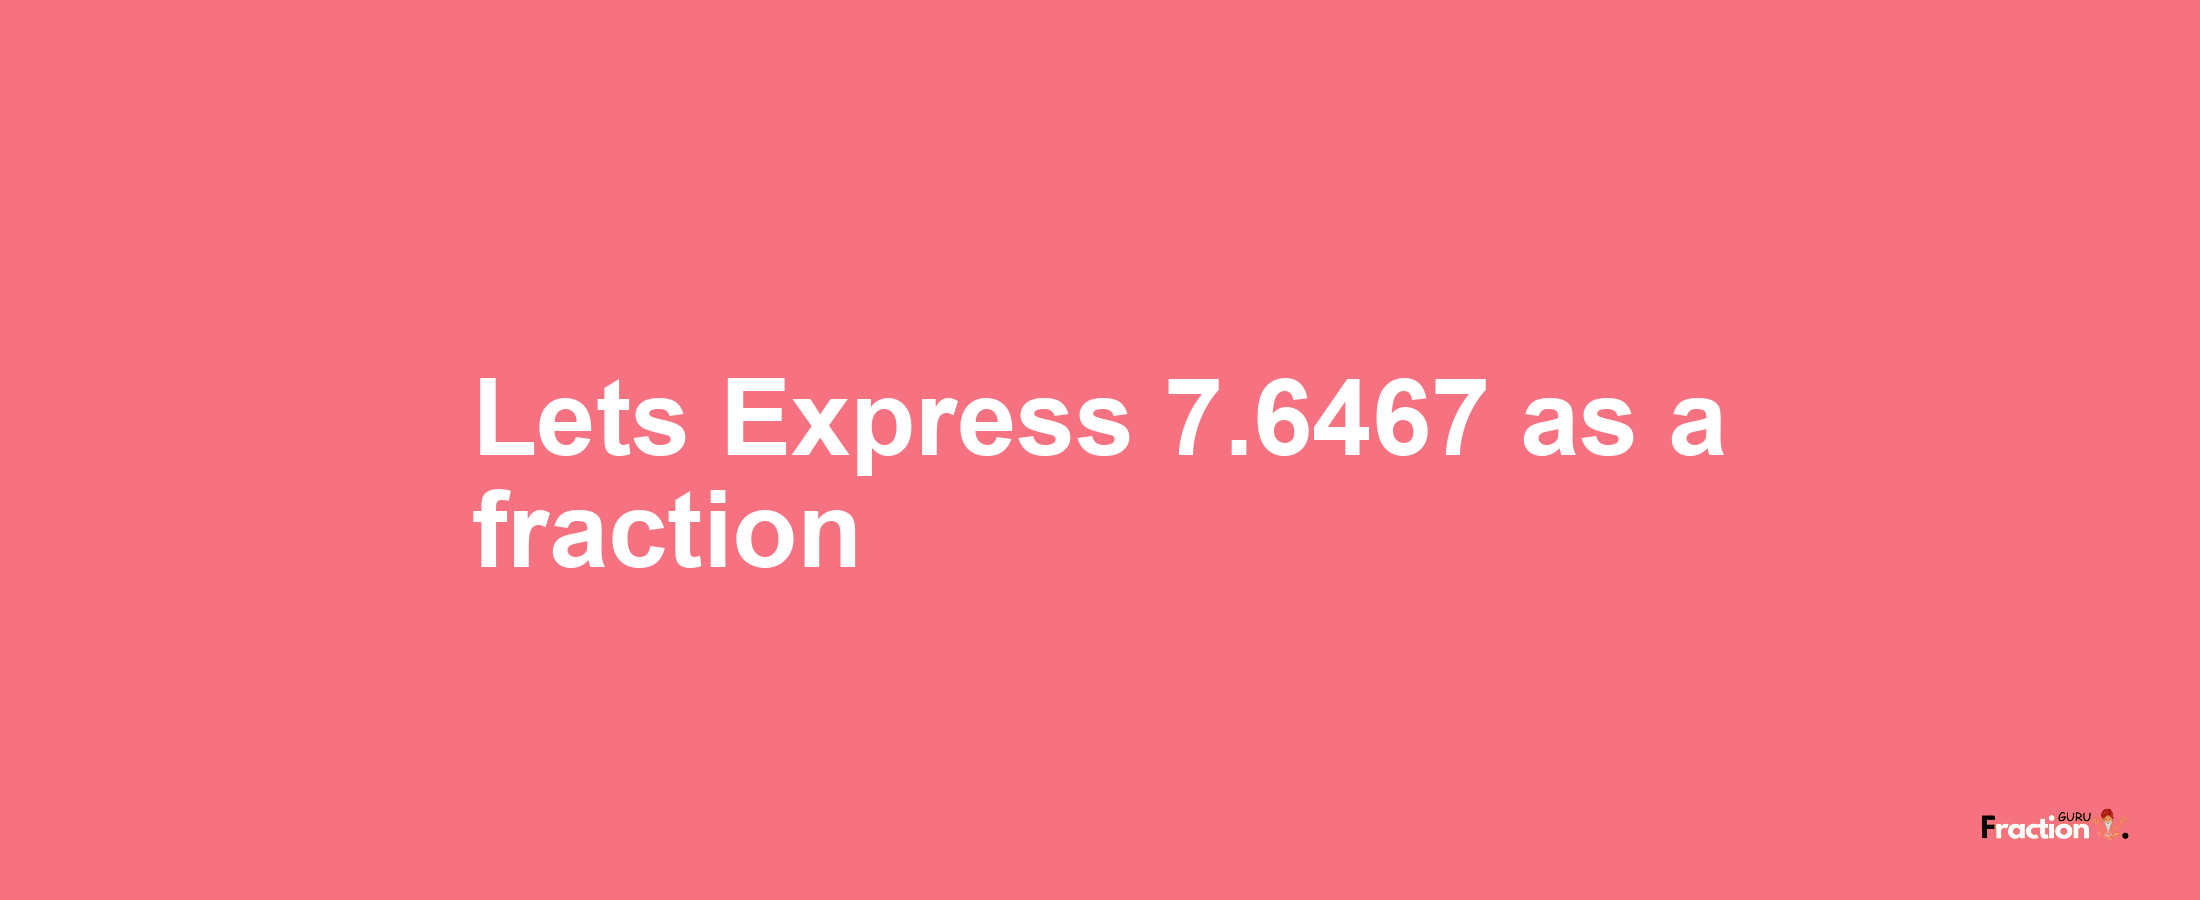 Lets Express 7.6467 as afraction